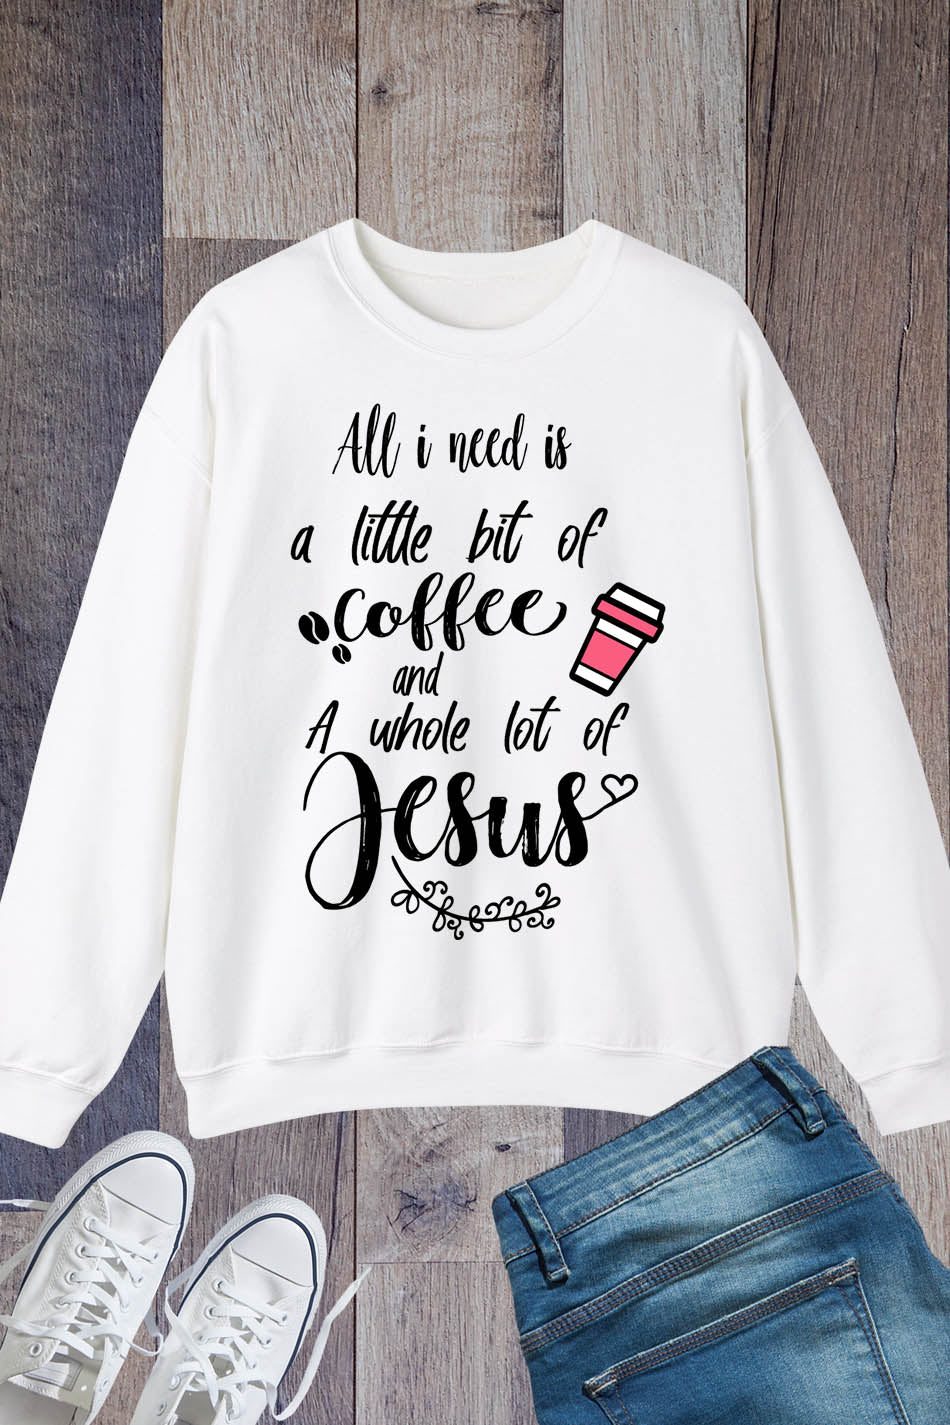 All I Need is a Little Bit of Coffee and a Whole Lot of Jesus Sweatshirts